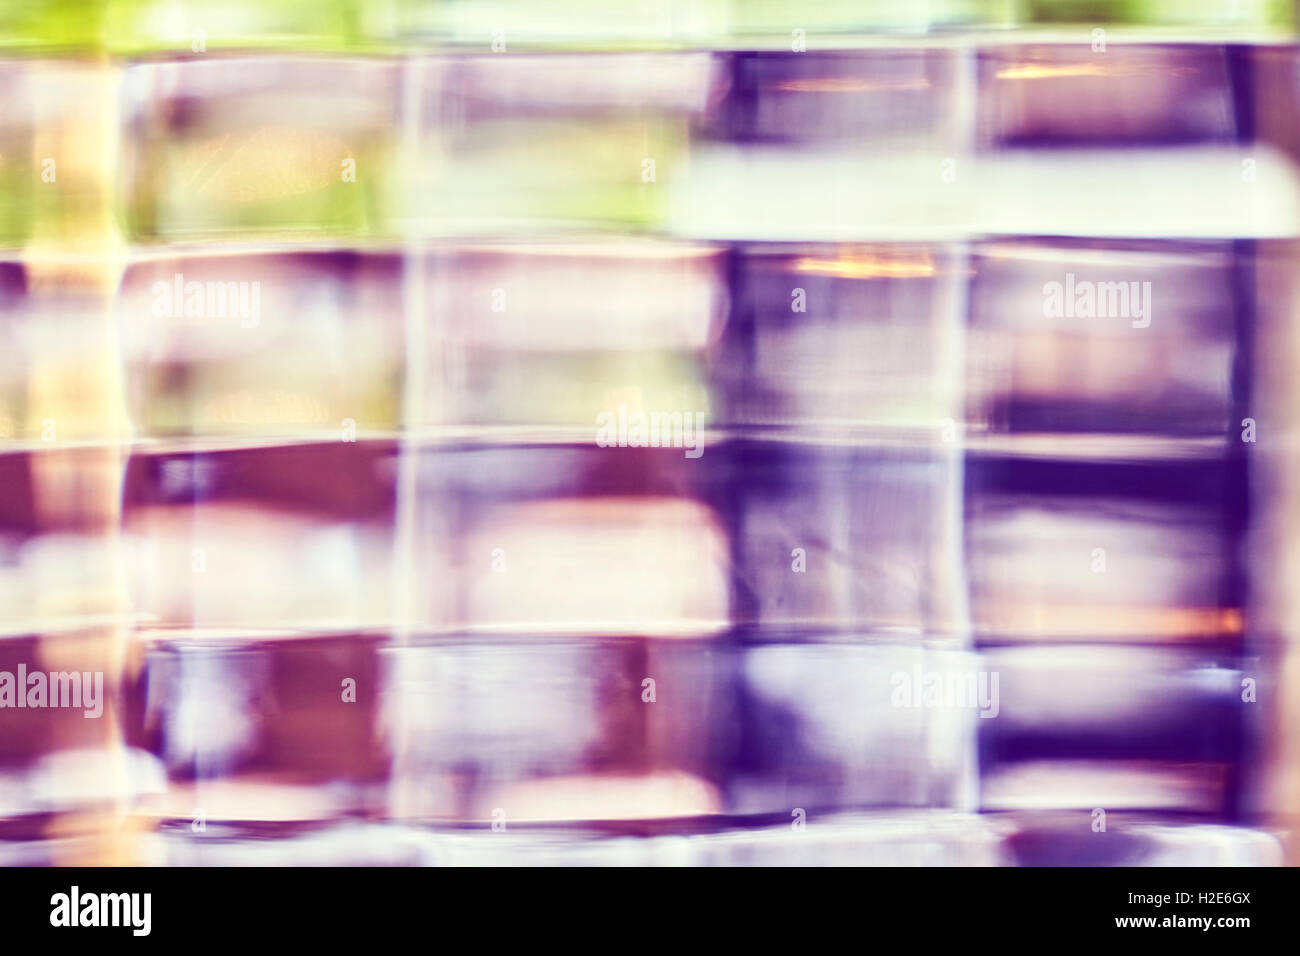 Blurred photo of glass block, abstract background. Stock Photo